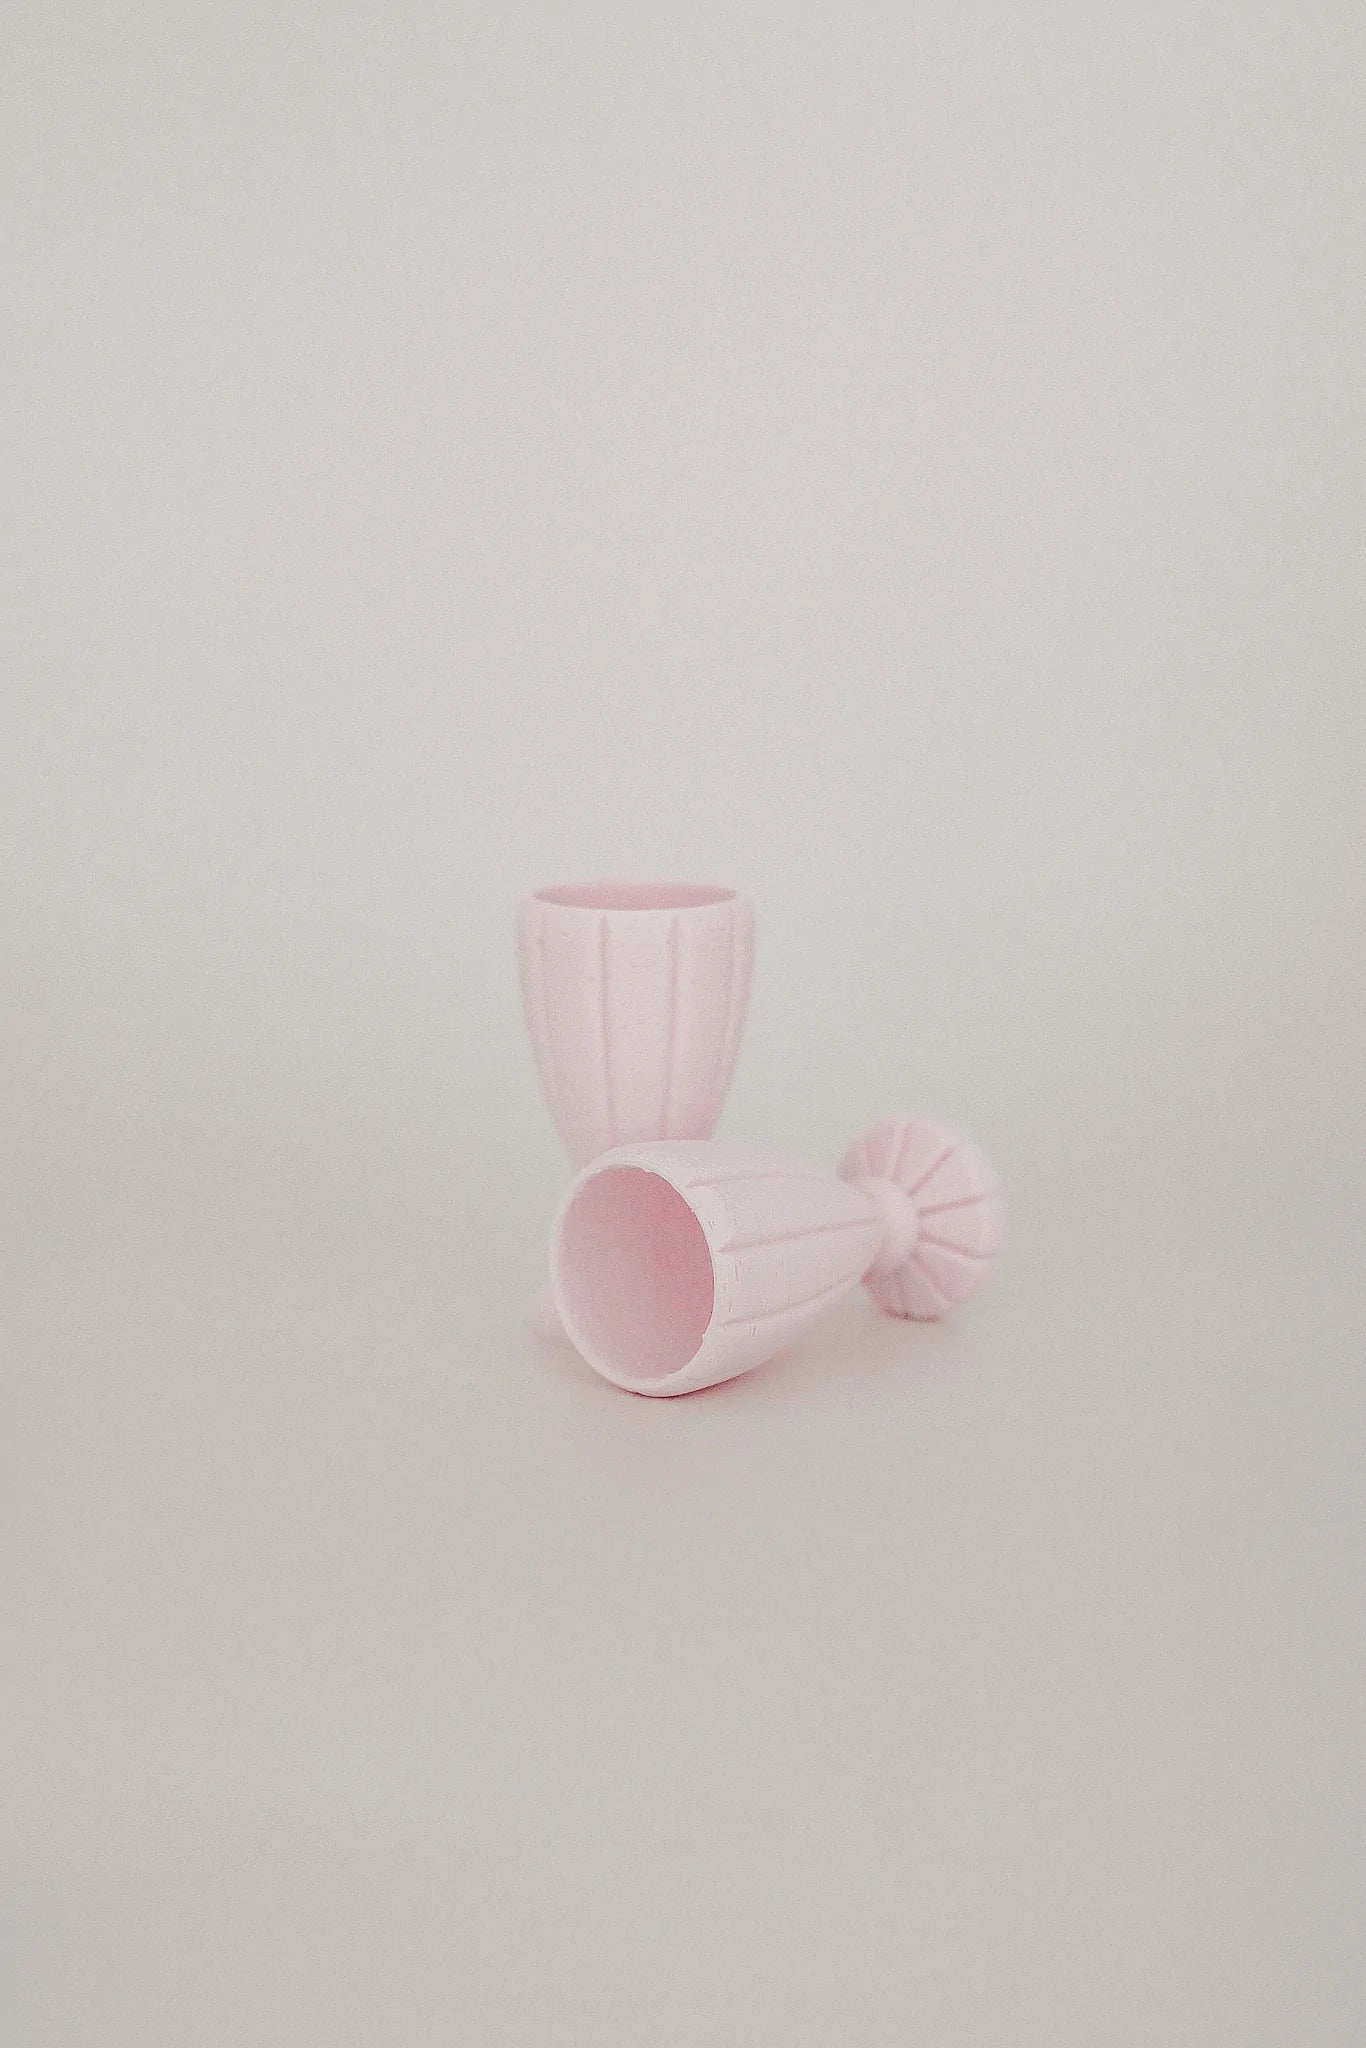 ICE-CREAM SUNDAE CUP by BEADIE BUG PLAY - The Playful Collective